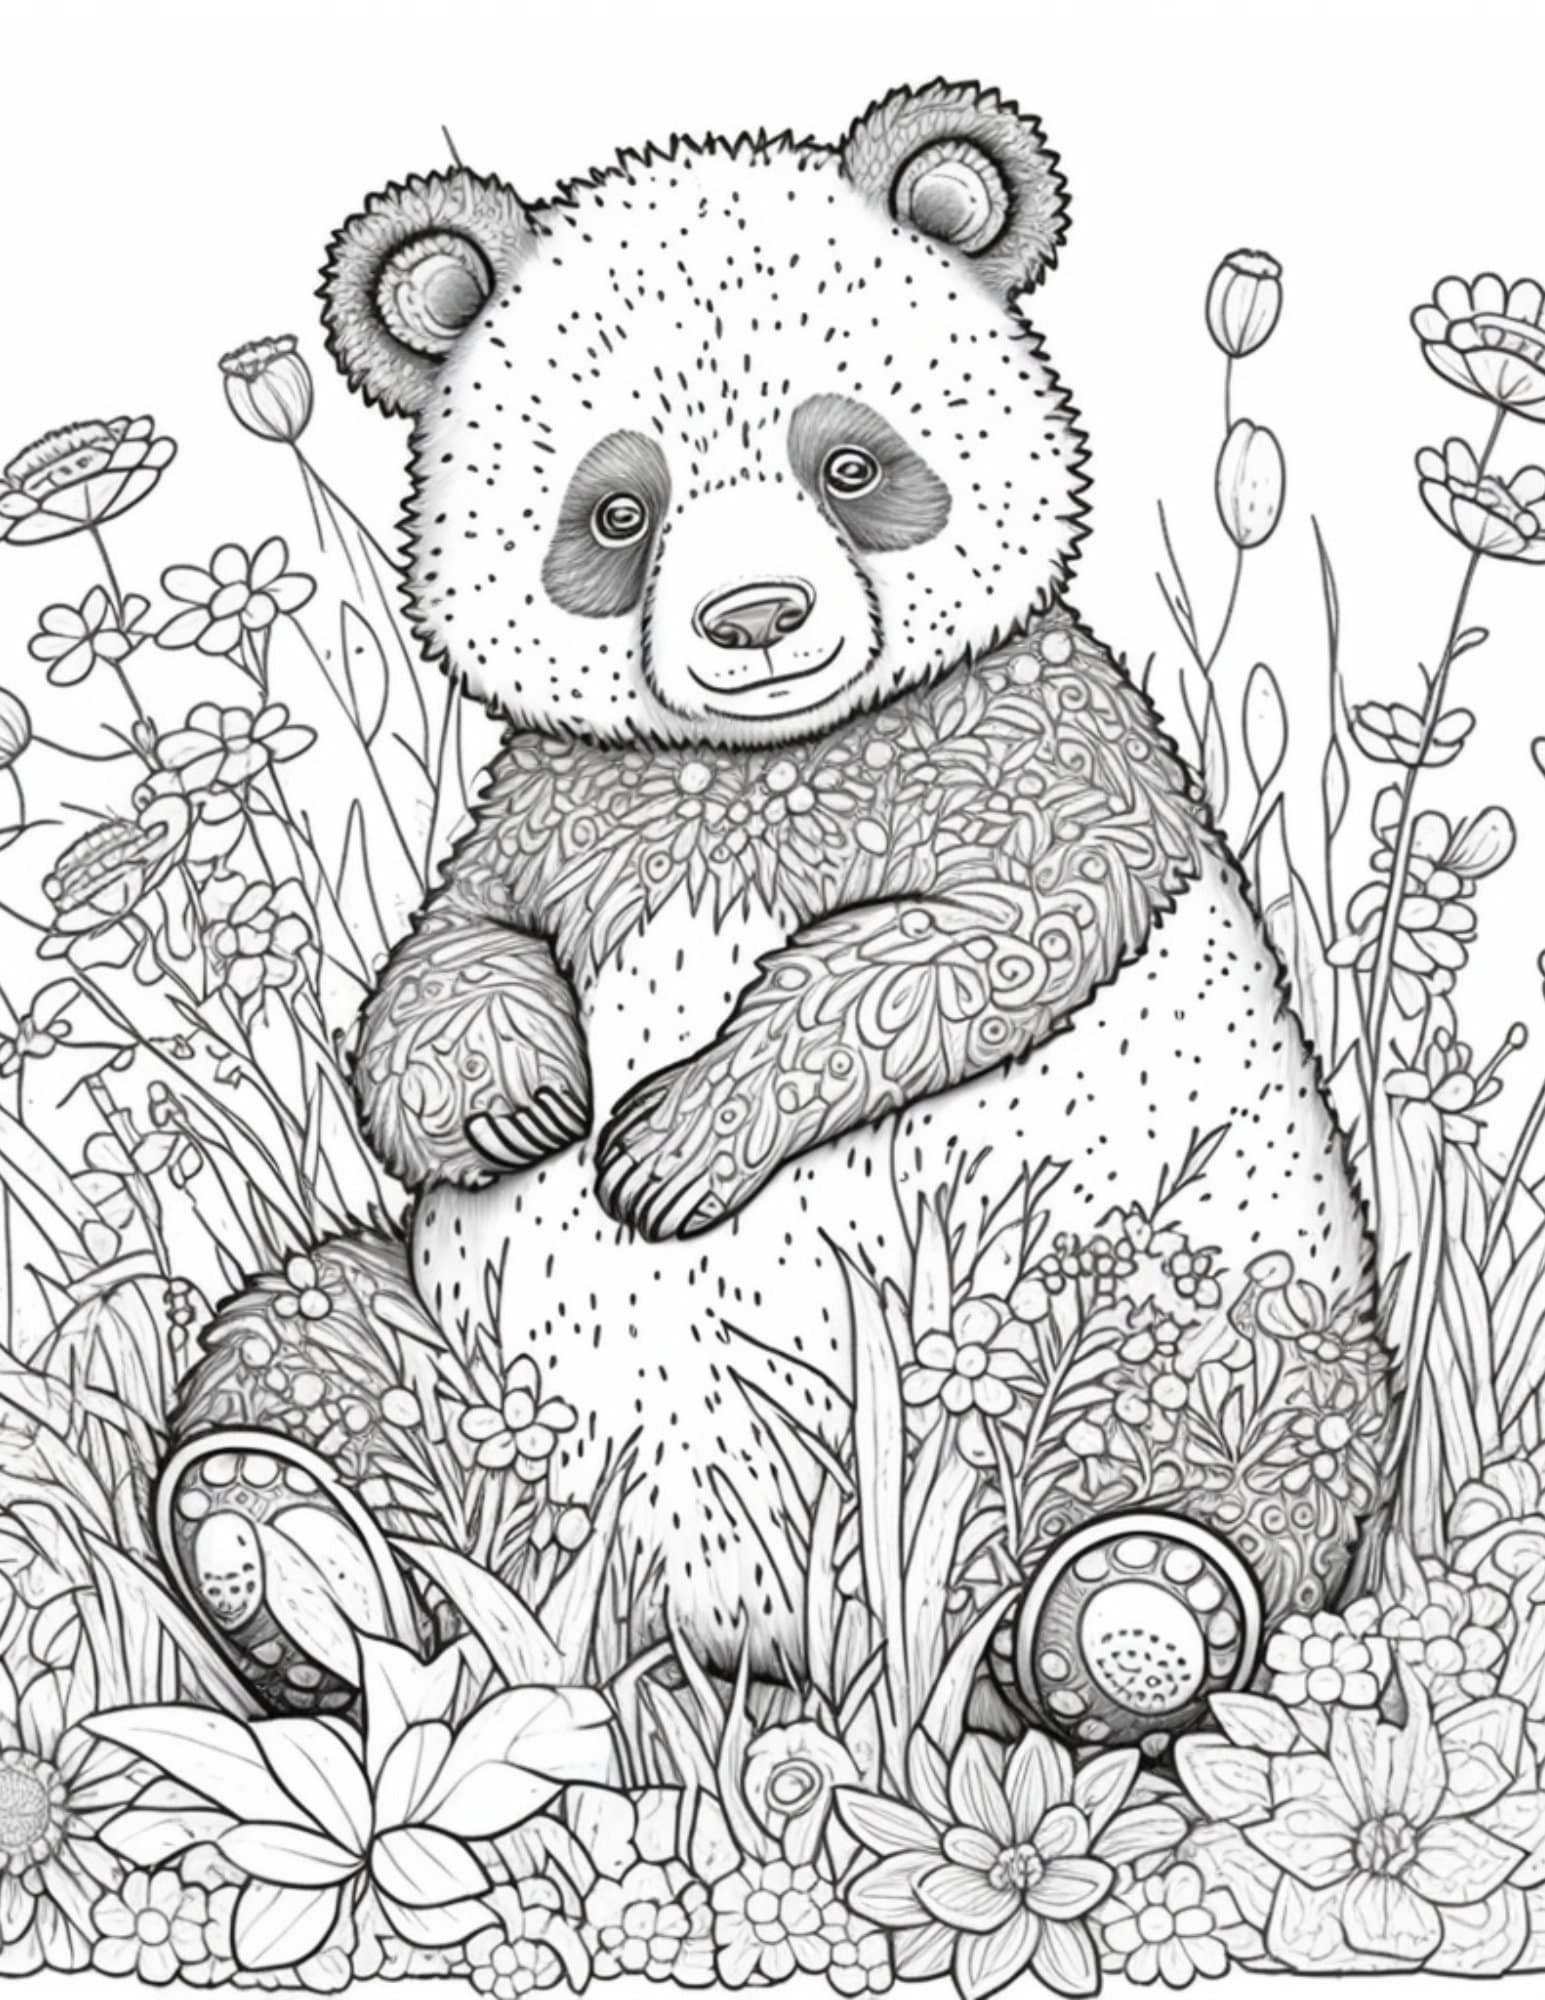 Panda bear just got done rolling down the hill coloring page digital print immediate download